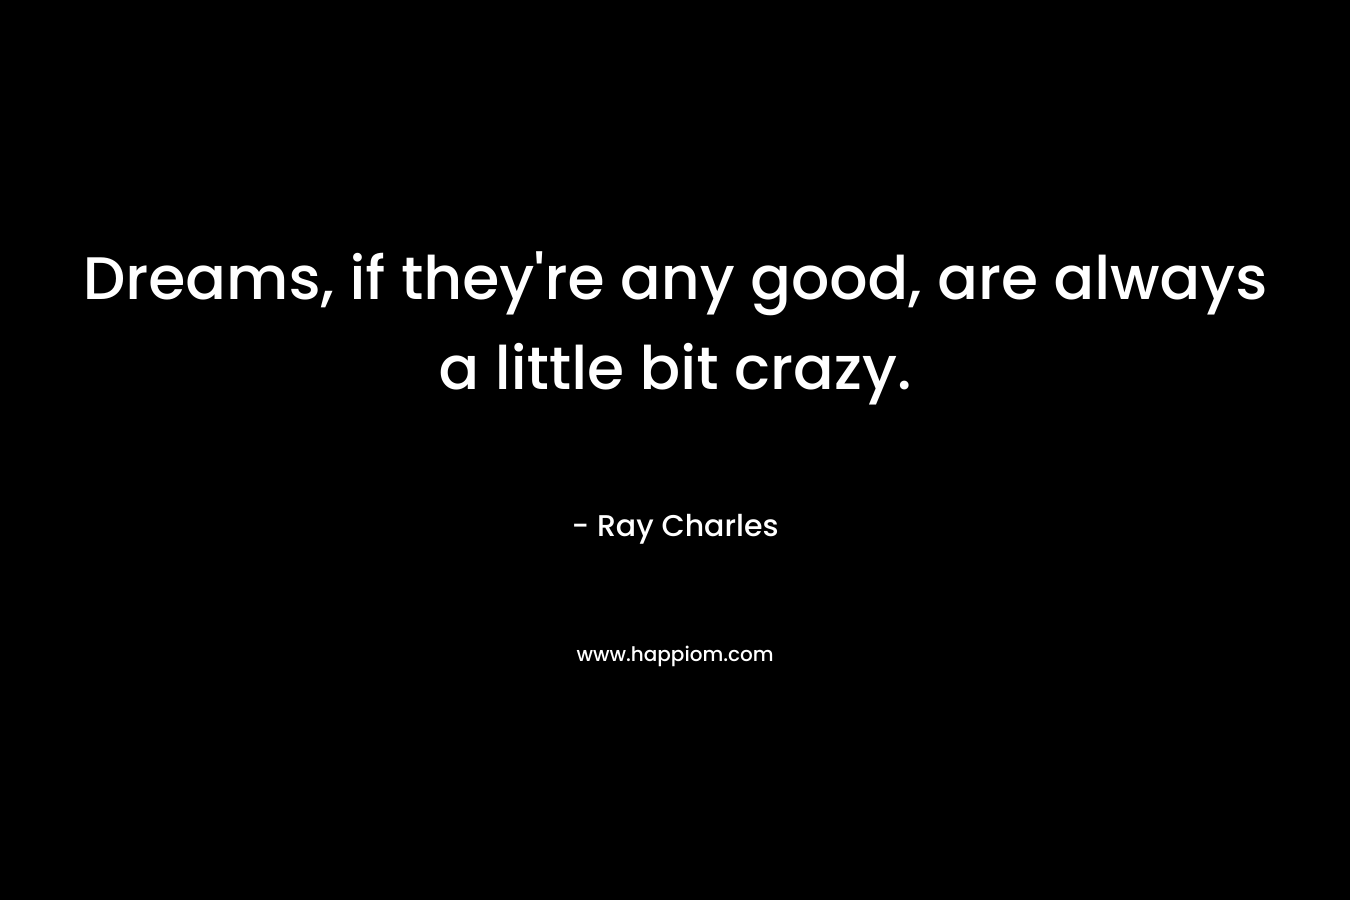 Dreams, if they’re any good, are always a little bit crazy.  – Ray Charles